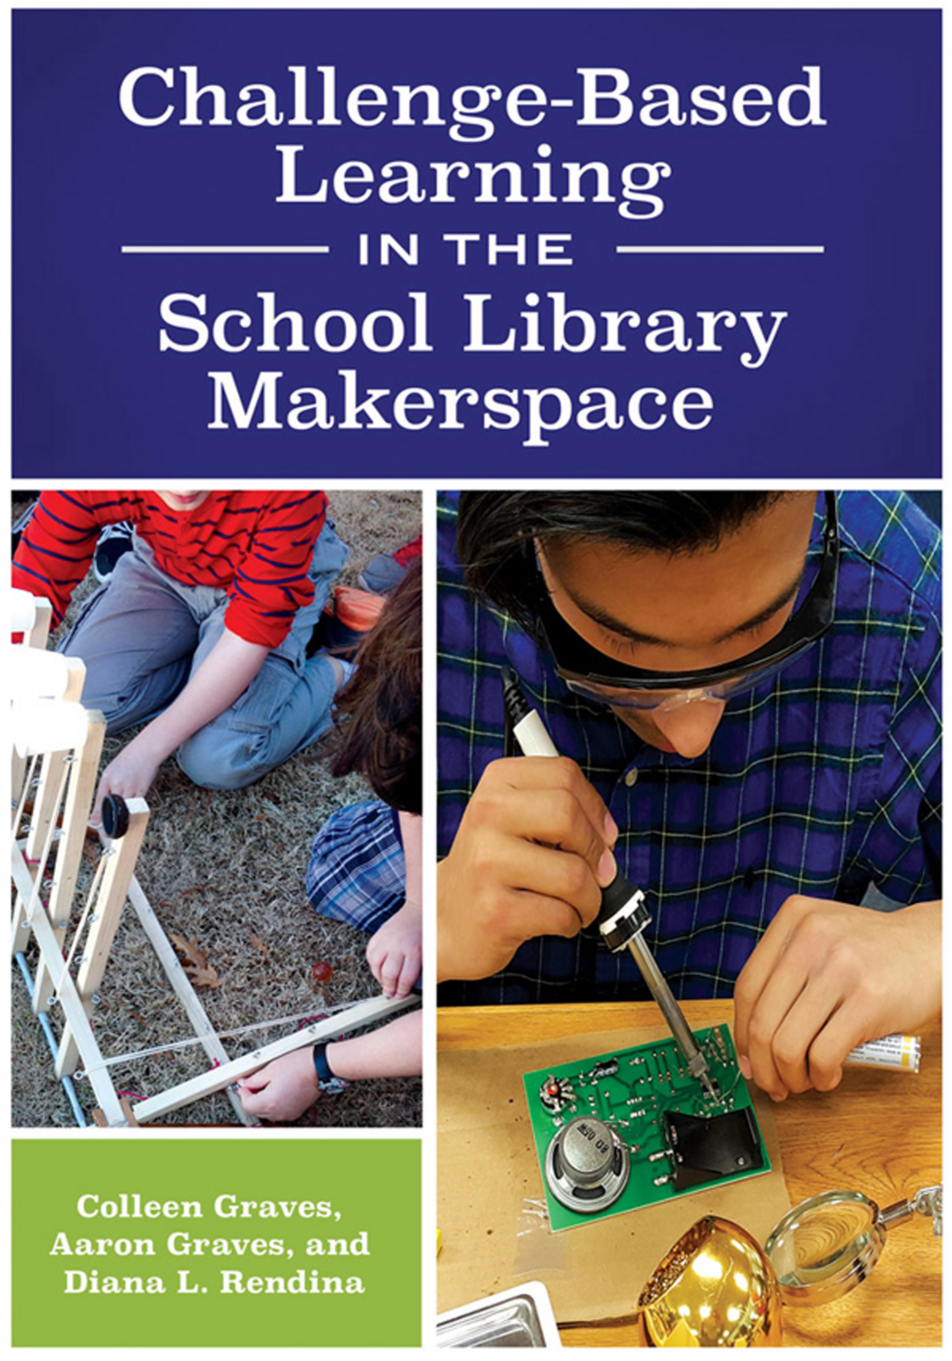 Challenge-Based Learning in the School Library Makerspace page Cover1